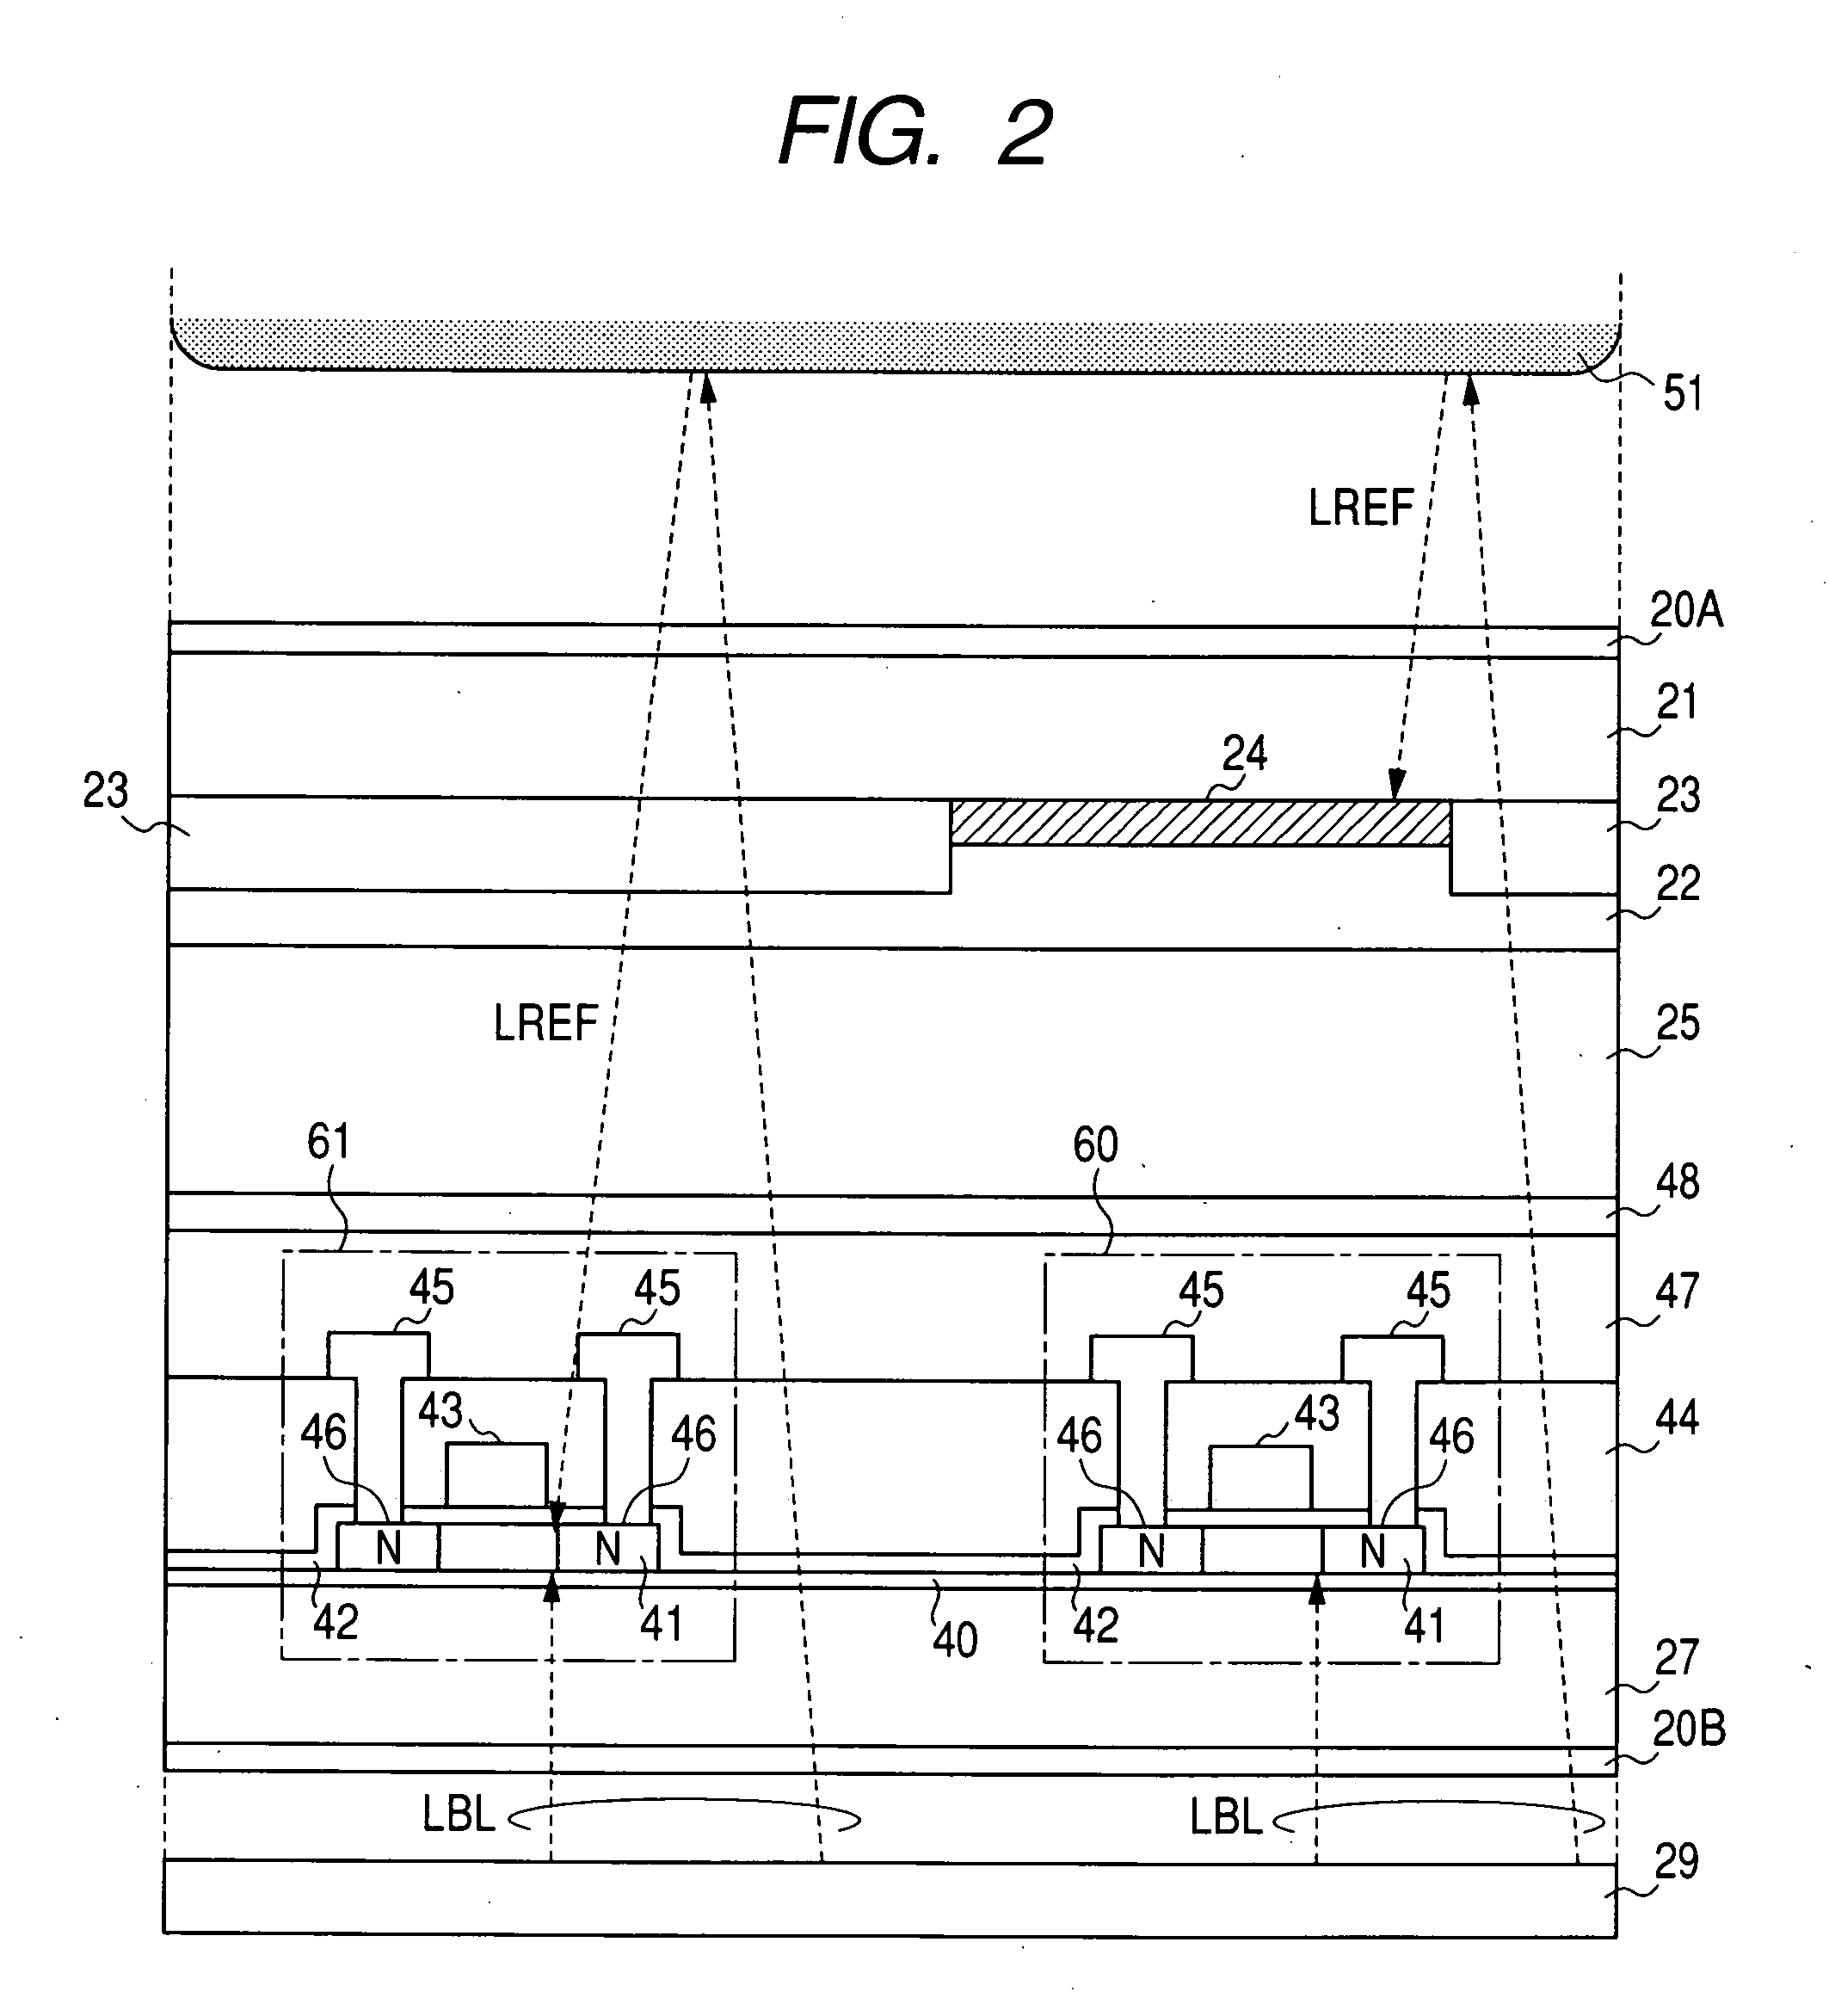 Image display apparatus with image entry function